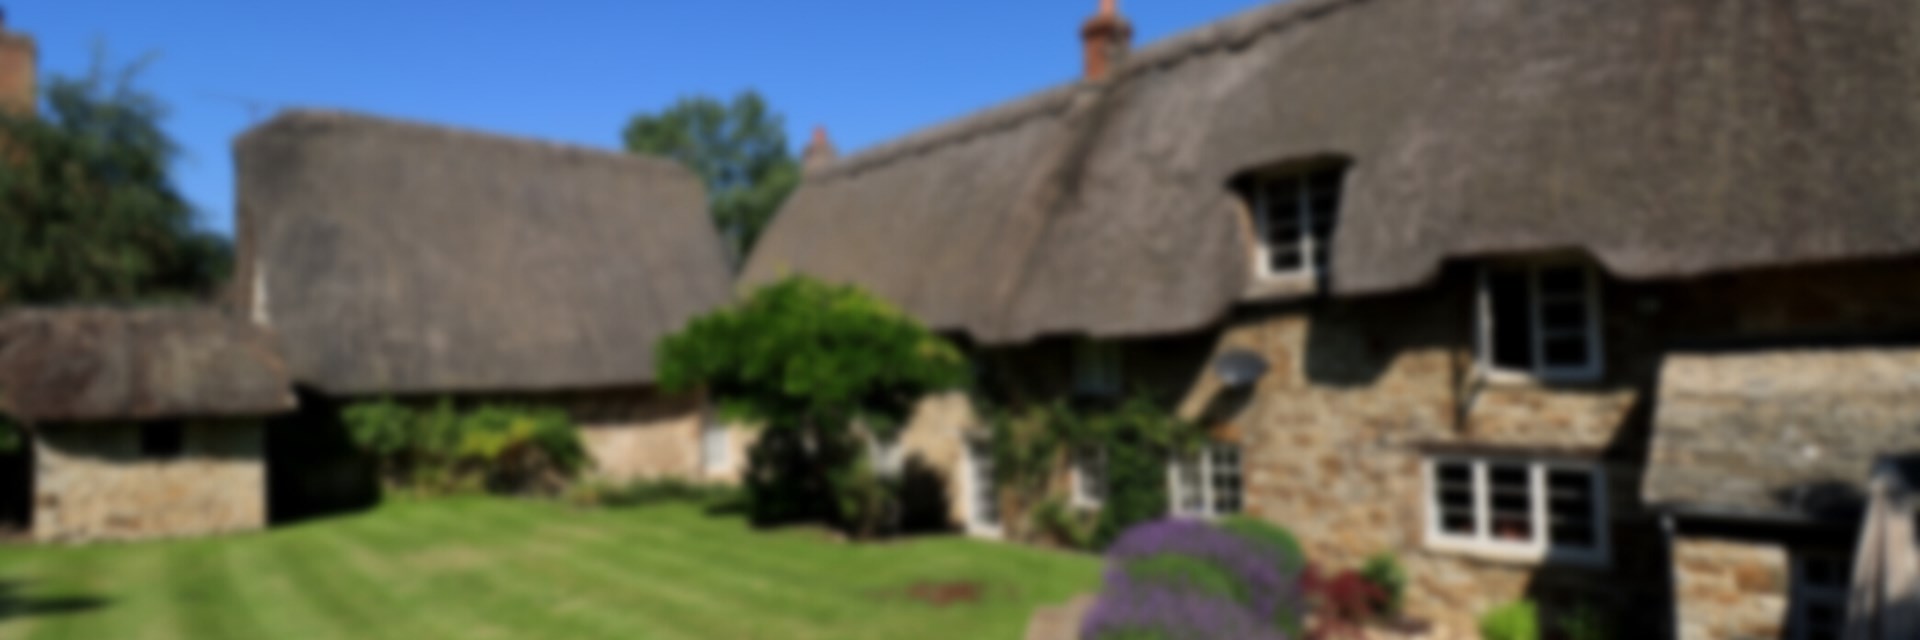 Thatched Cottage Oxfordshire